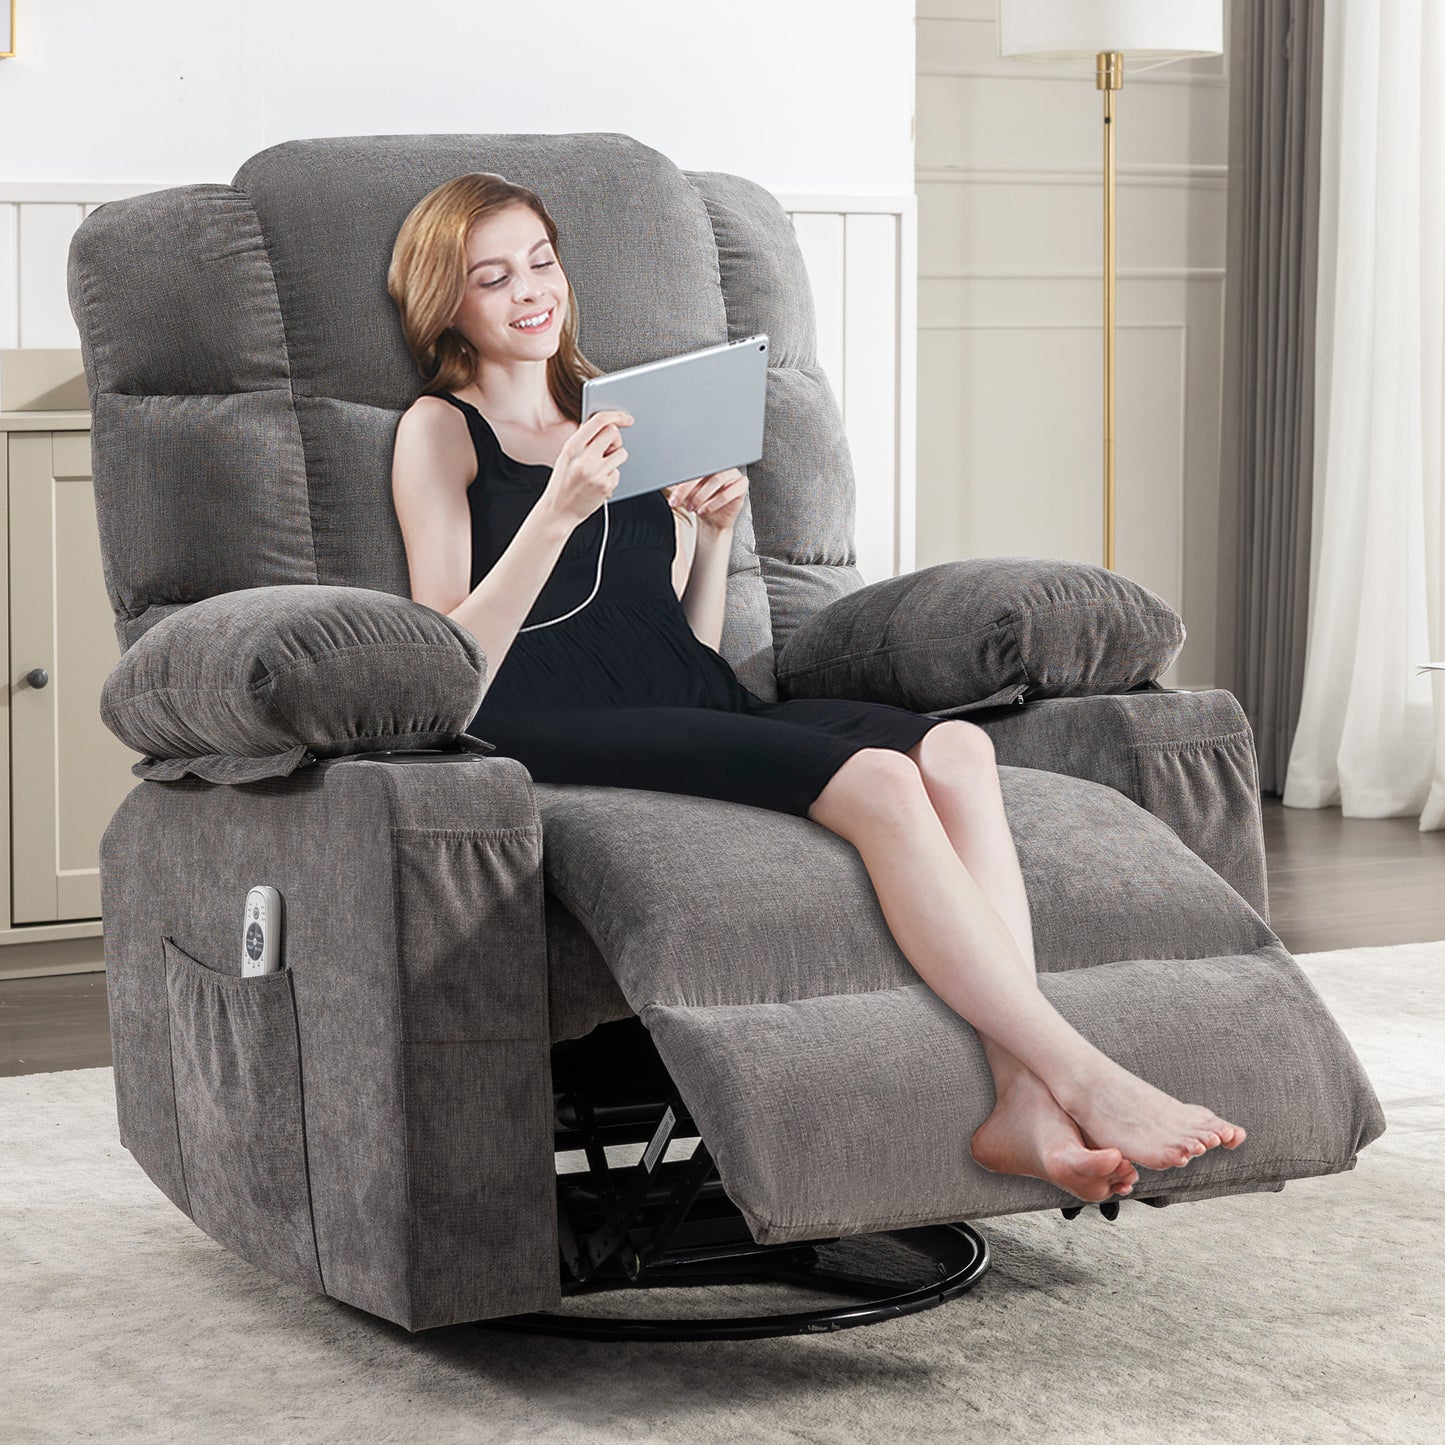 SYNGAR Rocker Recliner Chair for Living Room, Manual Recliner Chair with Heat and Massage Function, Cup Holders, USB, Oversized Recliner Rocking Sofa Swivel Glider Chair for Home Theater, Gray